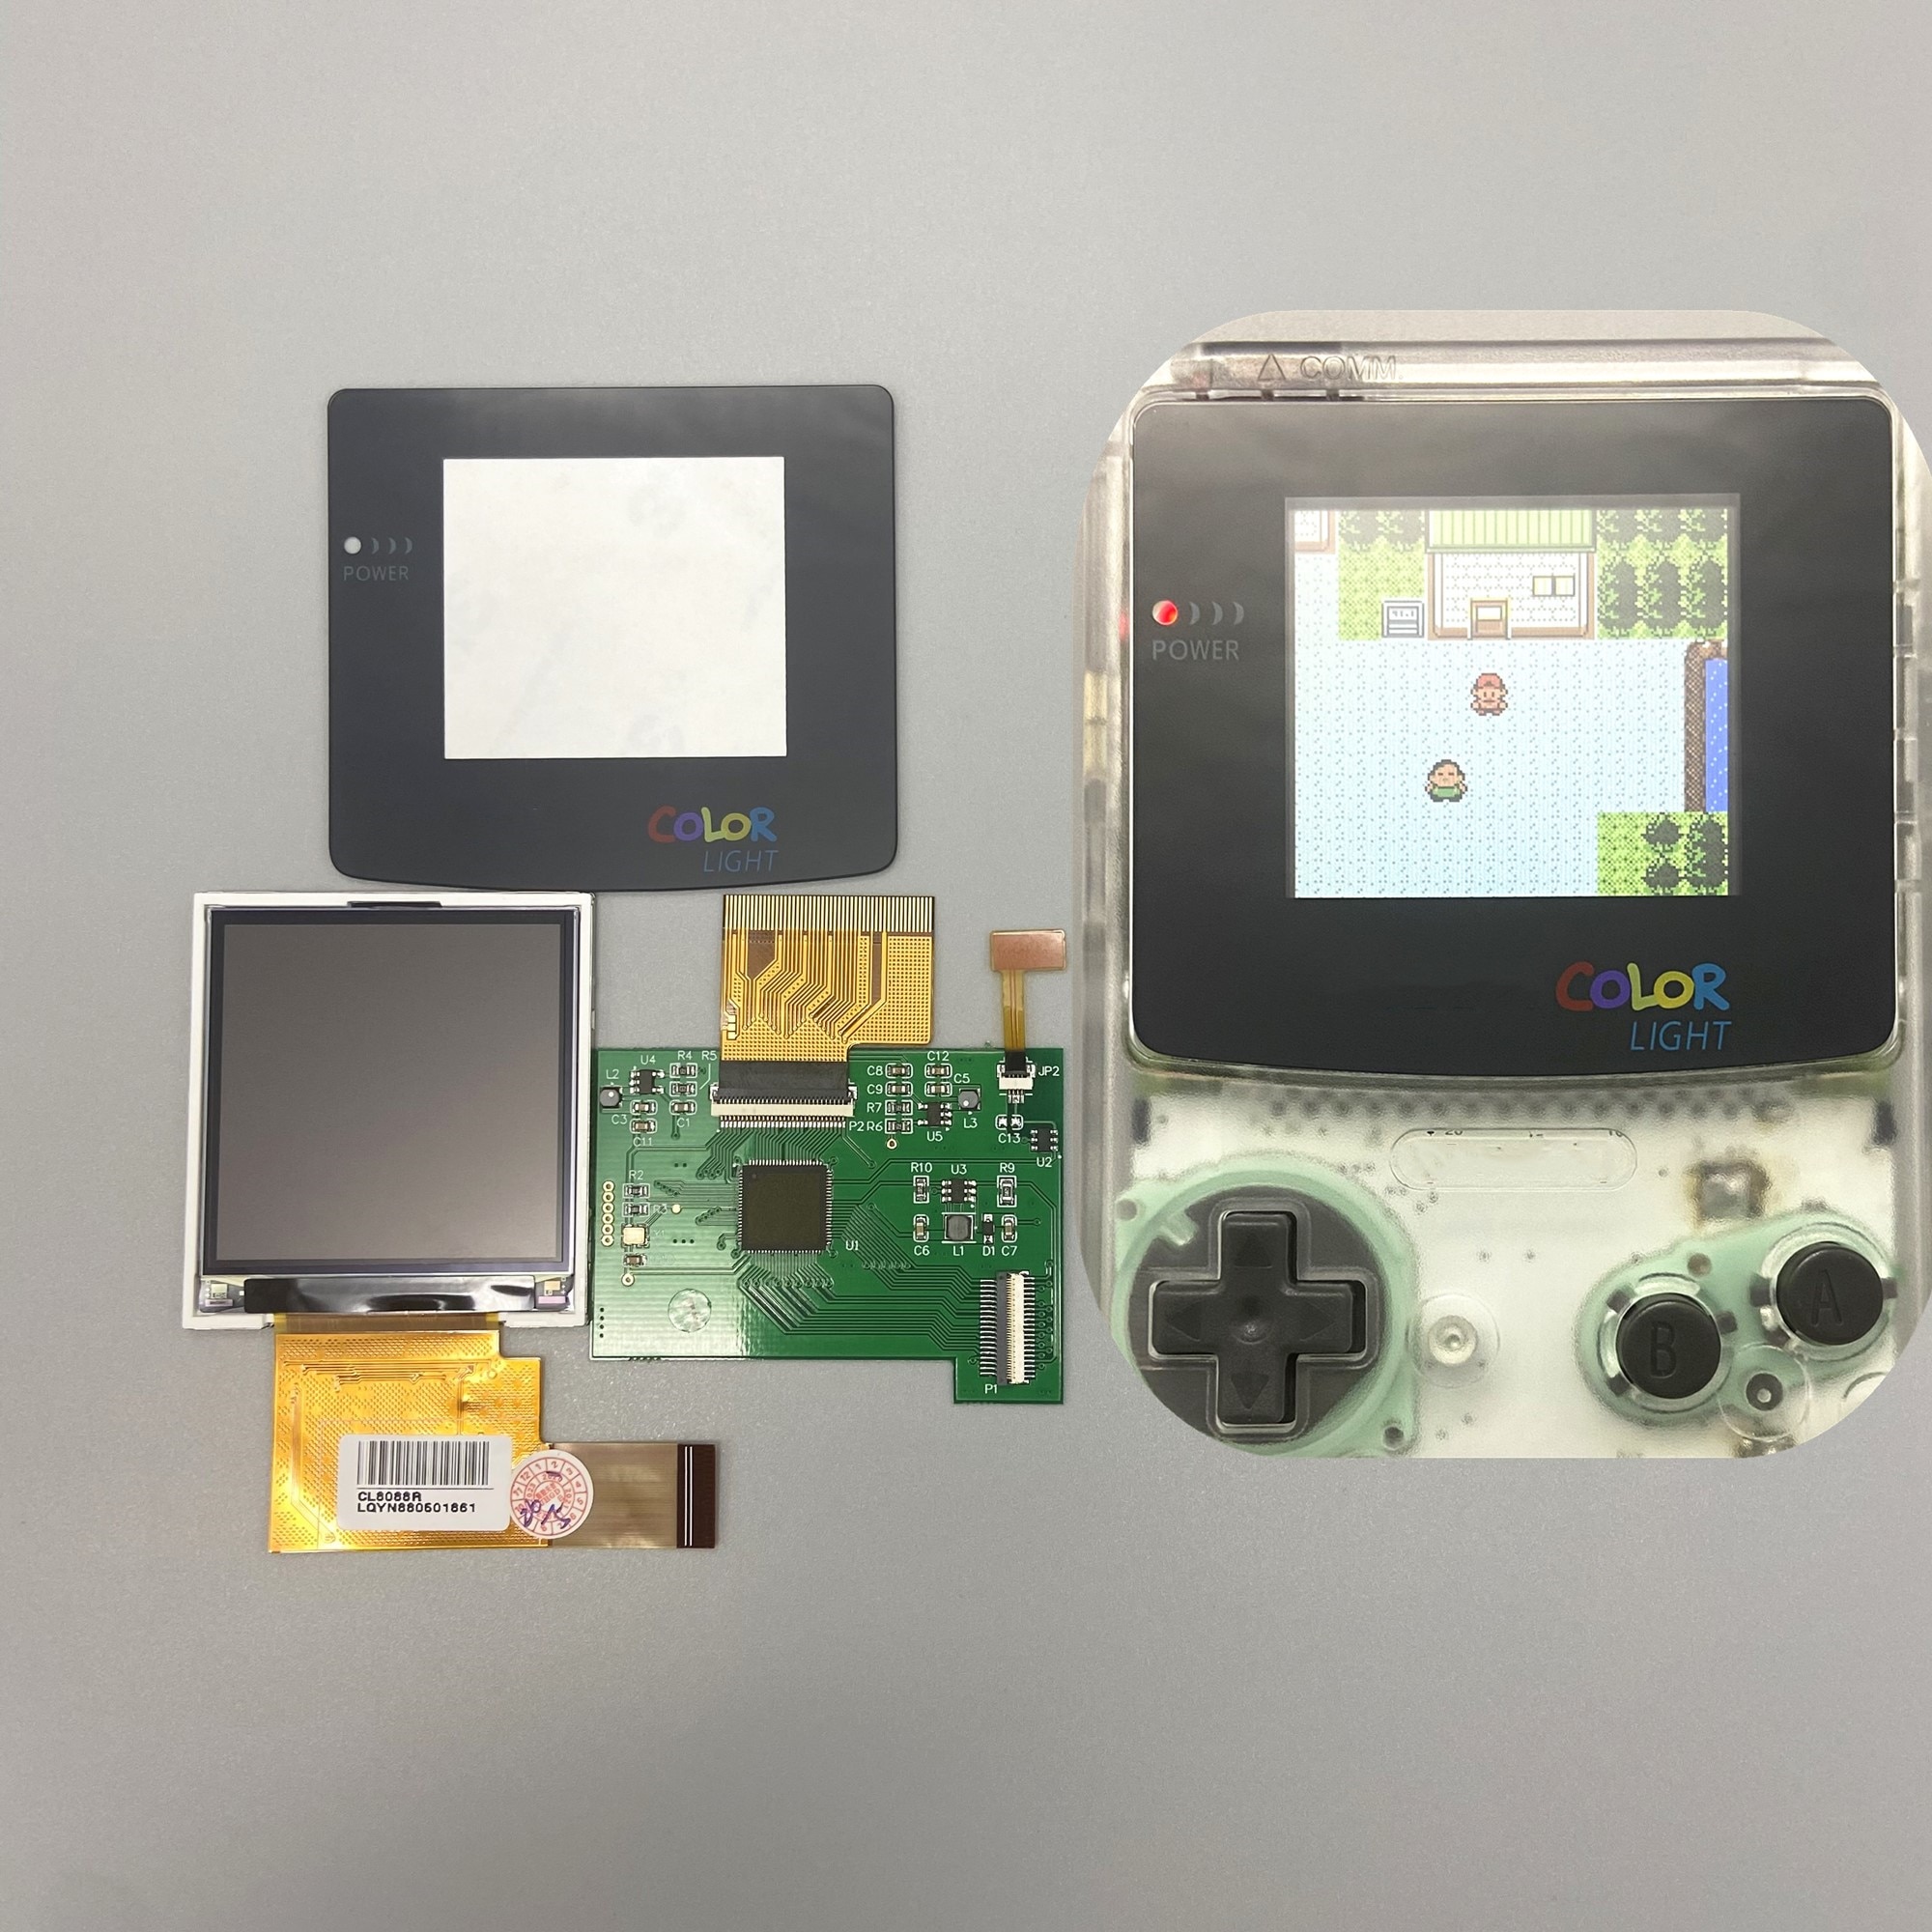 2.2 inches GBC LCD High brightness LCD screen for Gameboy COLOR GBC, plug and play without welding and shell cutting.